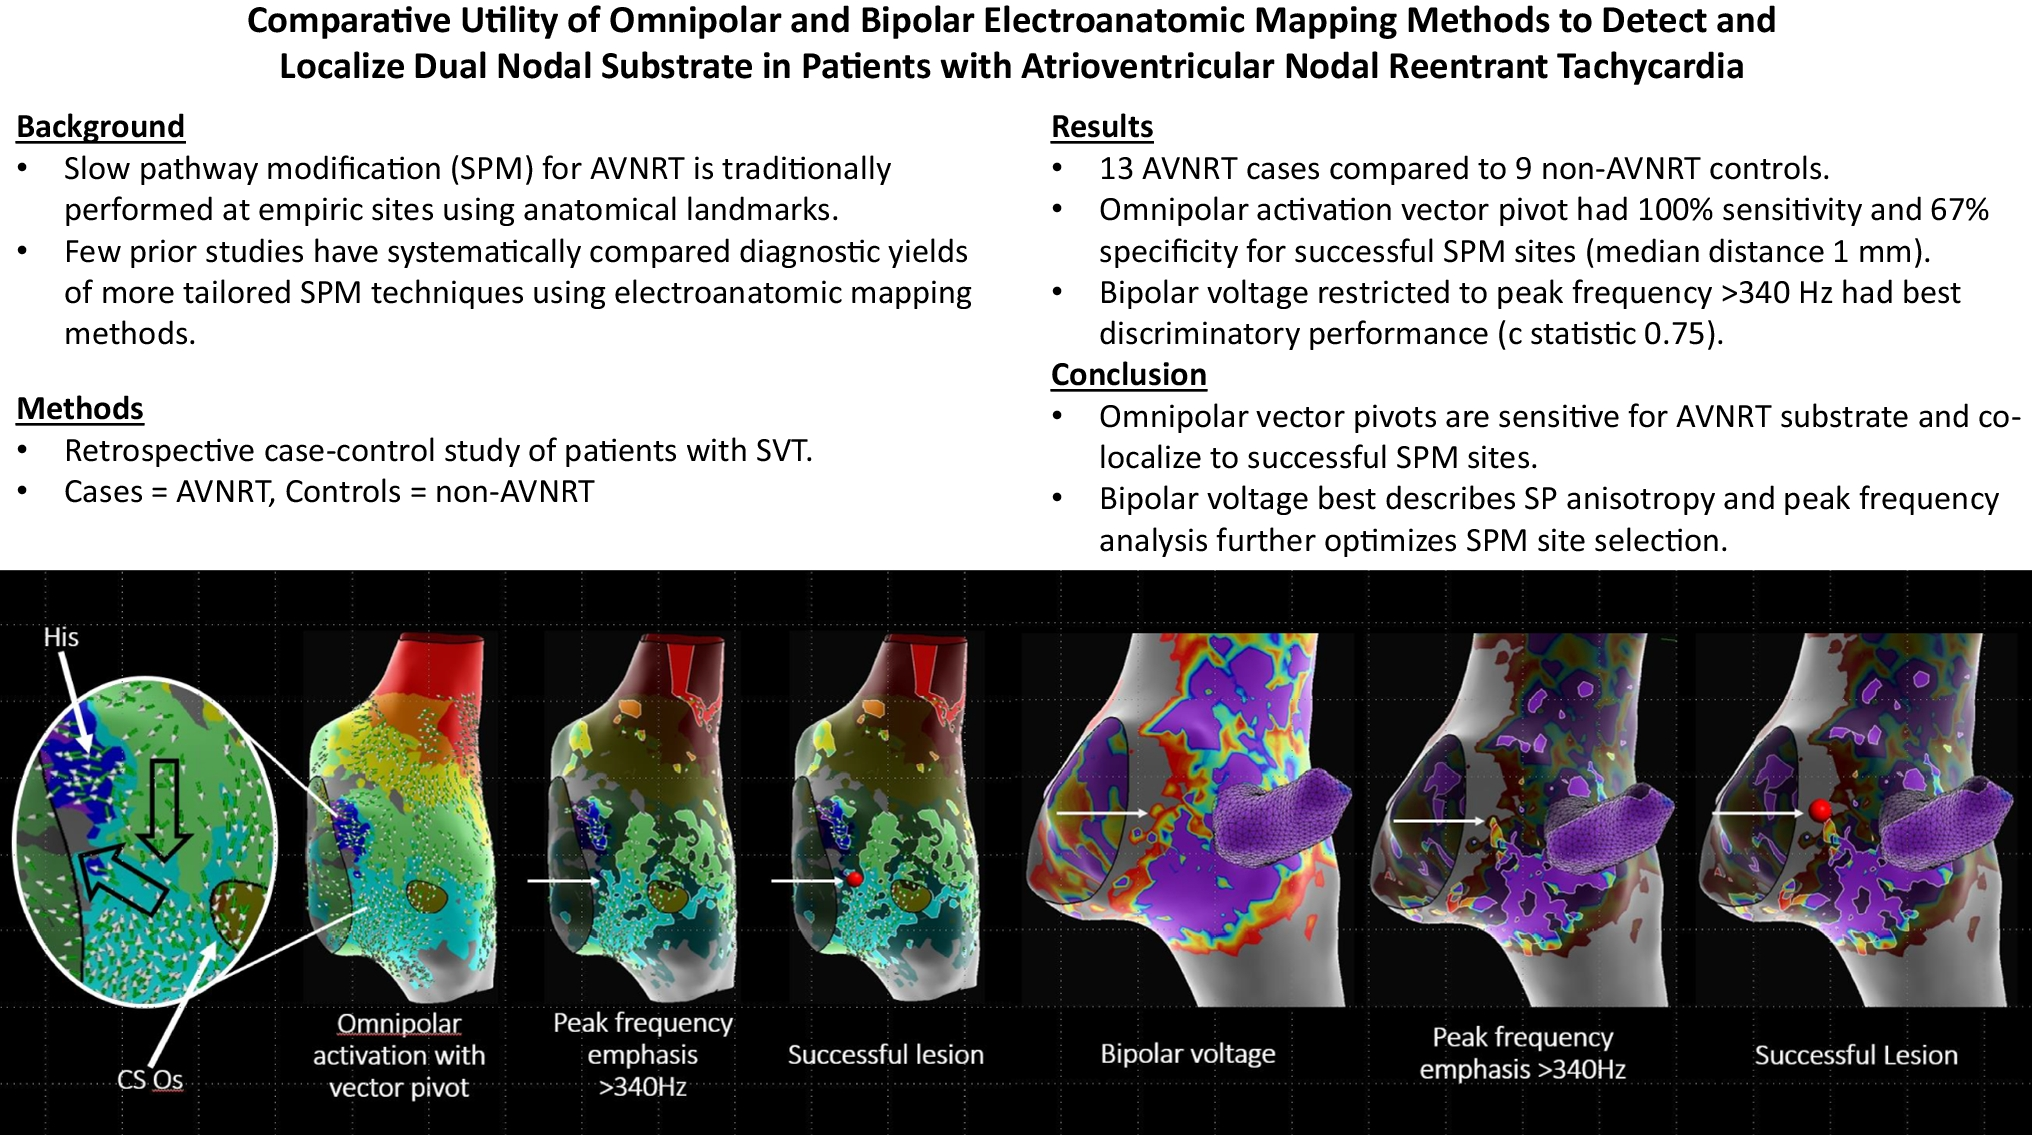 Comparative utility of omnipolar and bipolar electroanatomic mapping methods to detect and localize dual nodal substrate in patients with atrioventricular nodal reentrant tachycardia